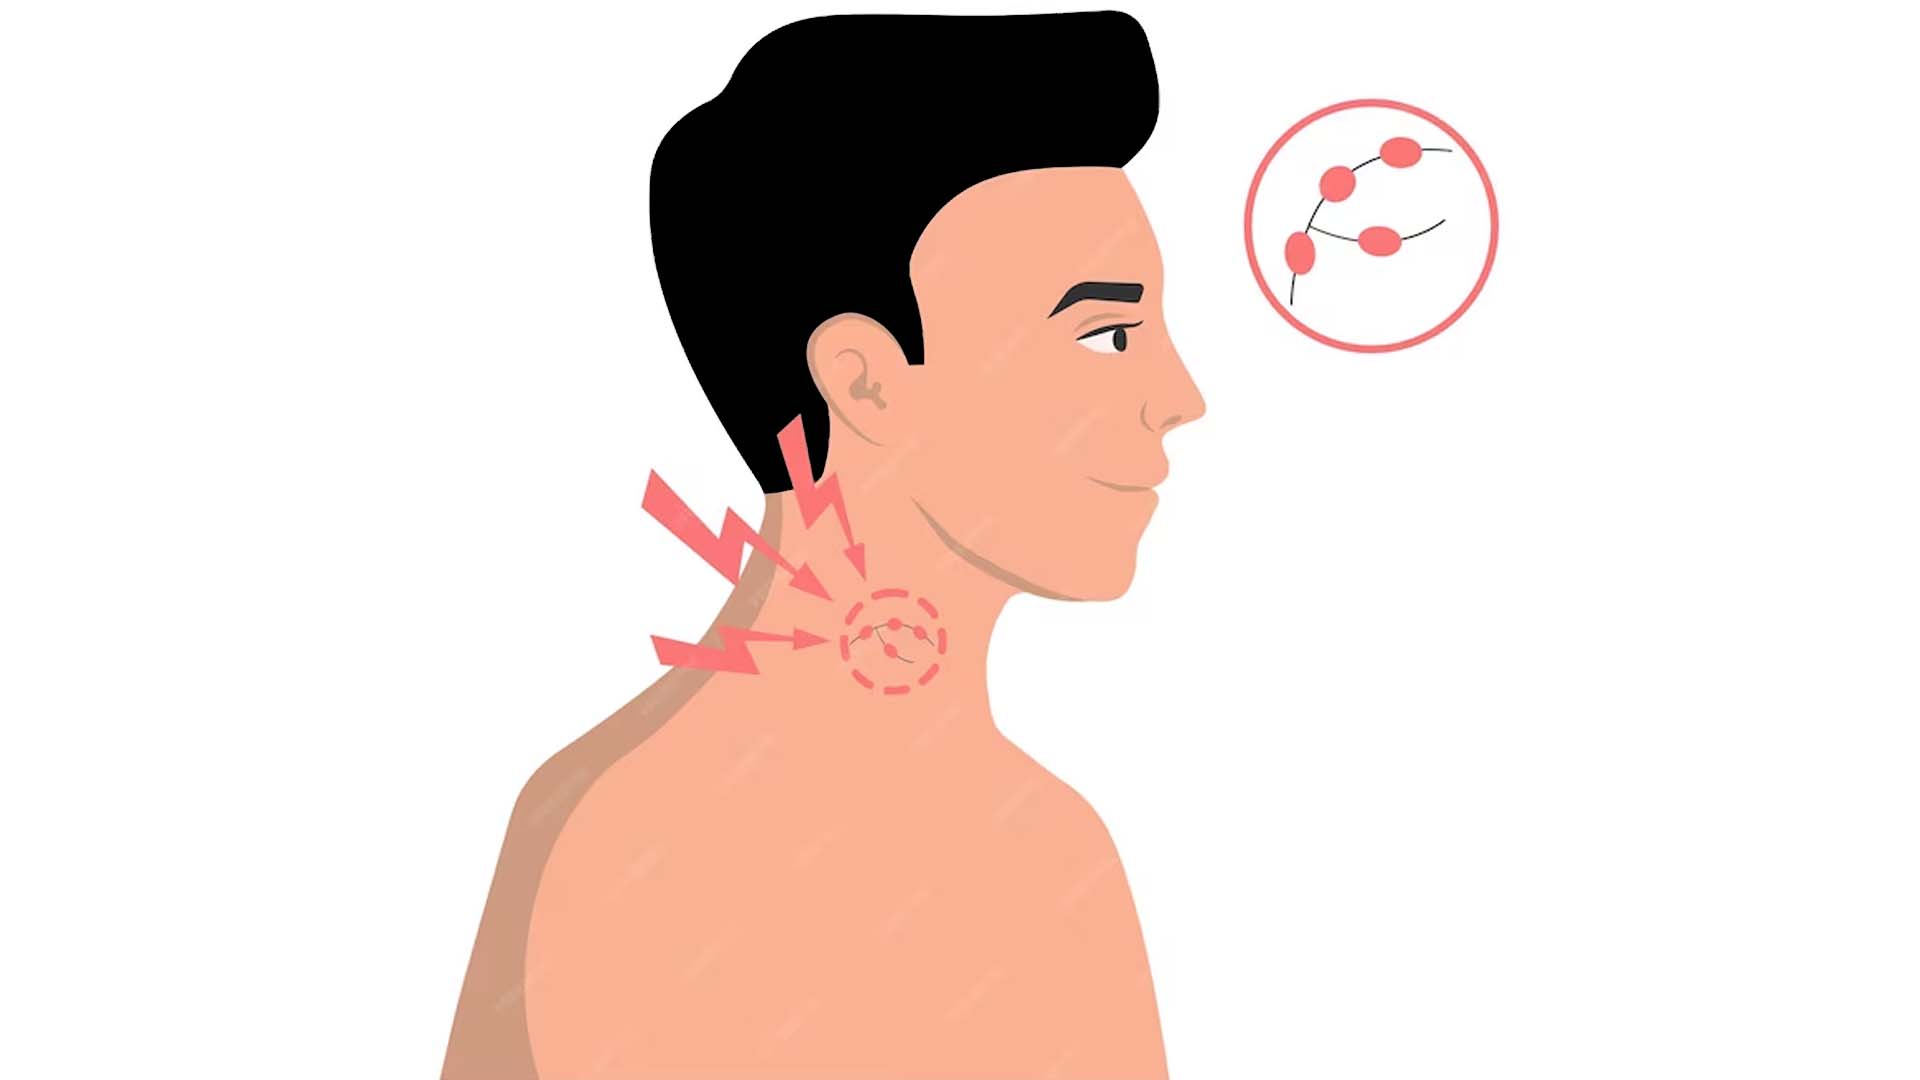 Swelling and pain in the glands (lymph nodes)